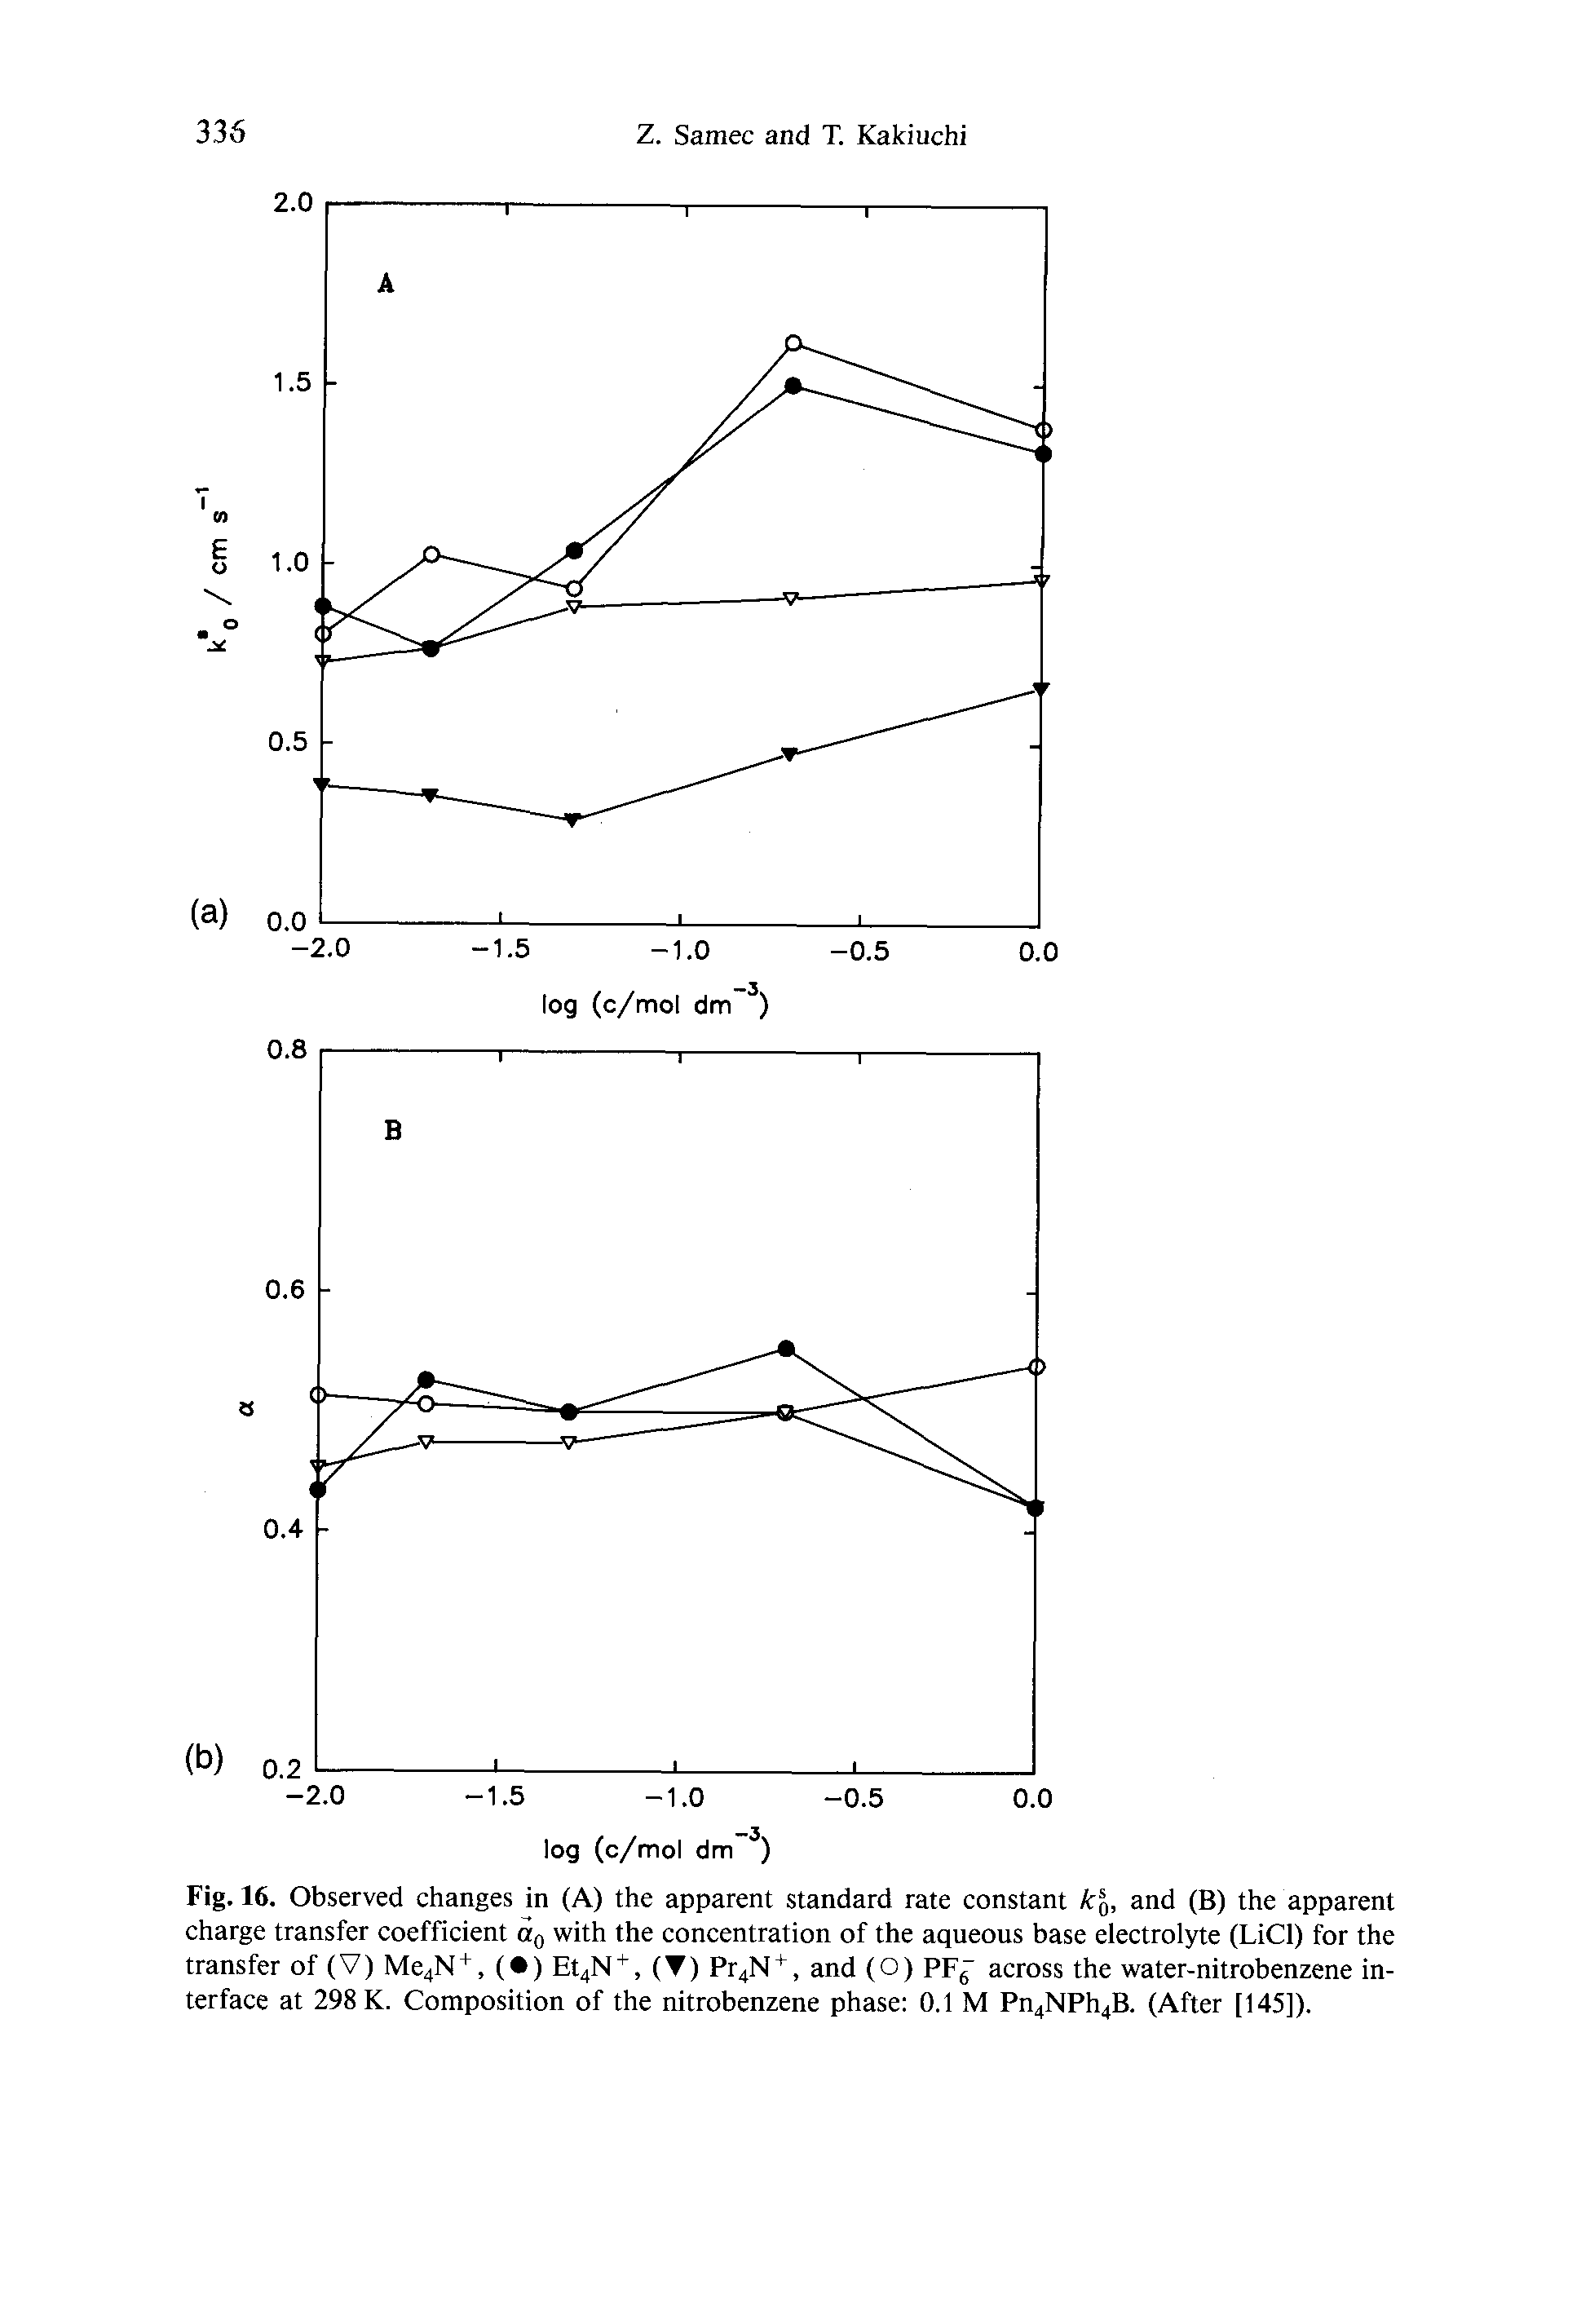 Fig. 16. Observed changes in (A) the apparent standard rate constant k, and (B) the apparent charge transfer coefficient Oq with the concentration of the aqueous base electrolyte (LiCl) for the transfer of (V) Mc4N+, ( ) Et4N, (T) Pr4N, and (O) PF across the water-nitrobenzene interface at 298 K. Composition of the nitrobenzene phase 0.1 M Pn4NPh4B. (After [145]).